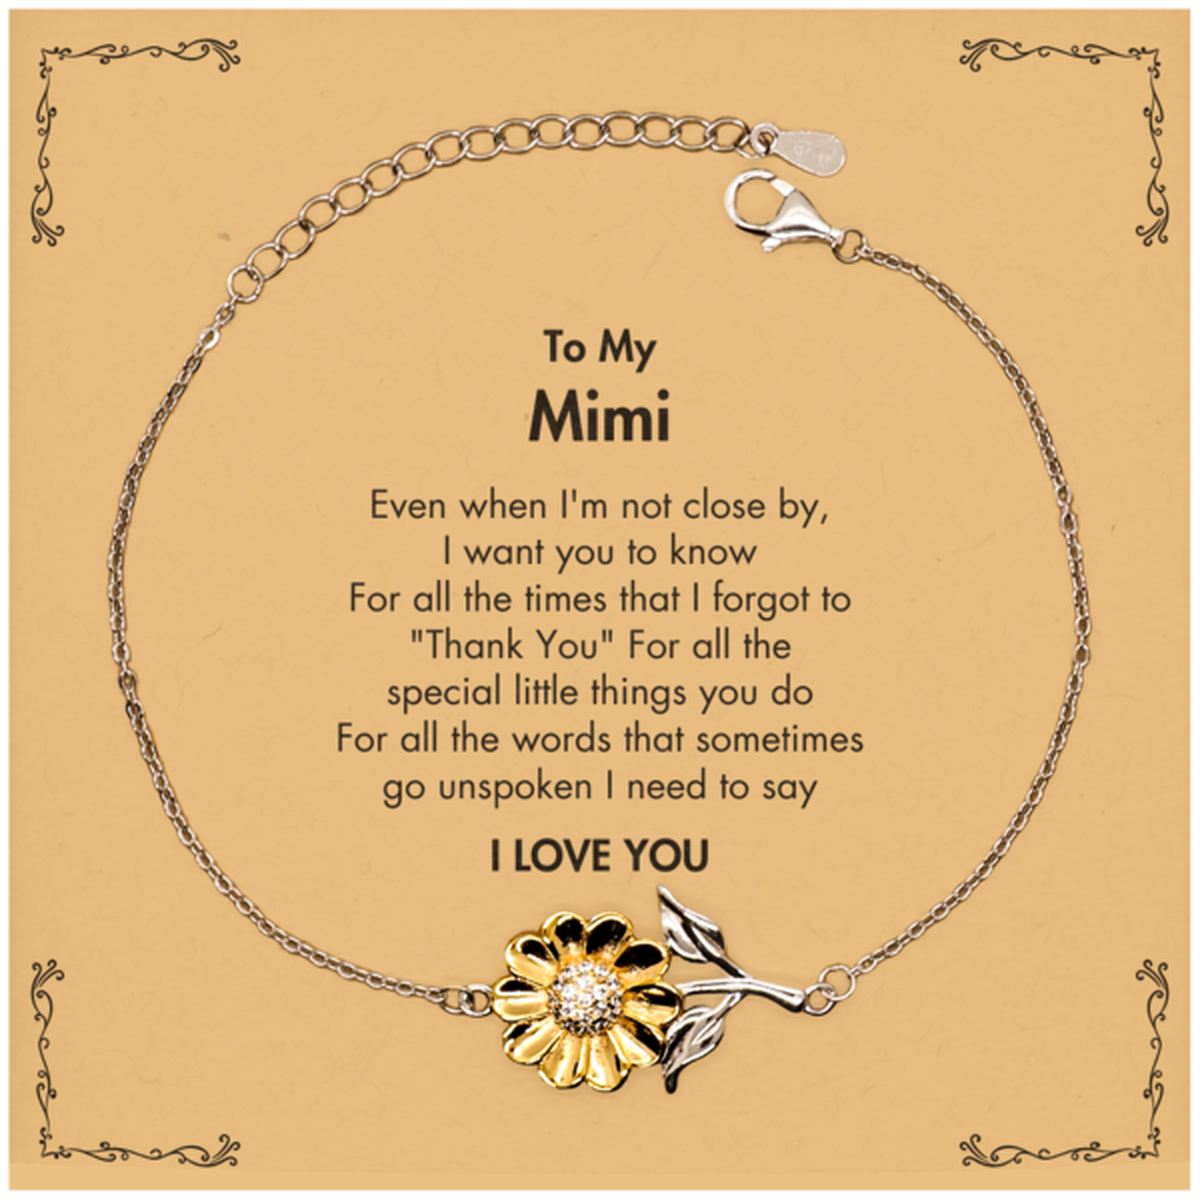 Thank You Gifts for Mimi, Keepsake Sunflower Bracelet Gifts for Mimi Birthday Mother's day Father's Day Mimi For all the words That sometimes go unspoken I need to say I LOVE YOU